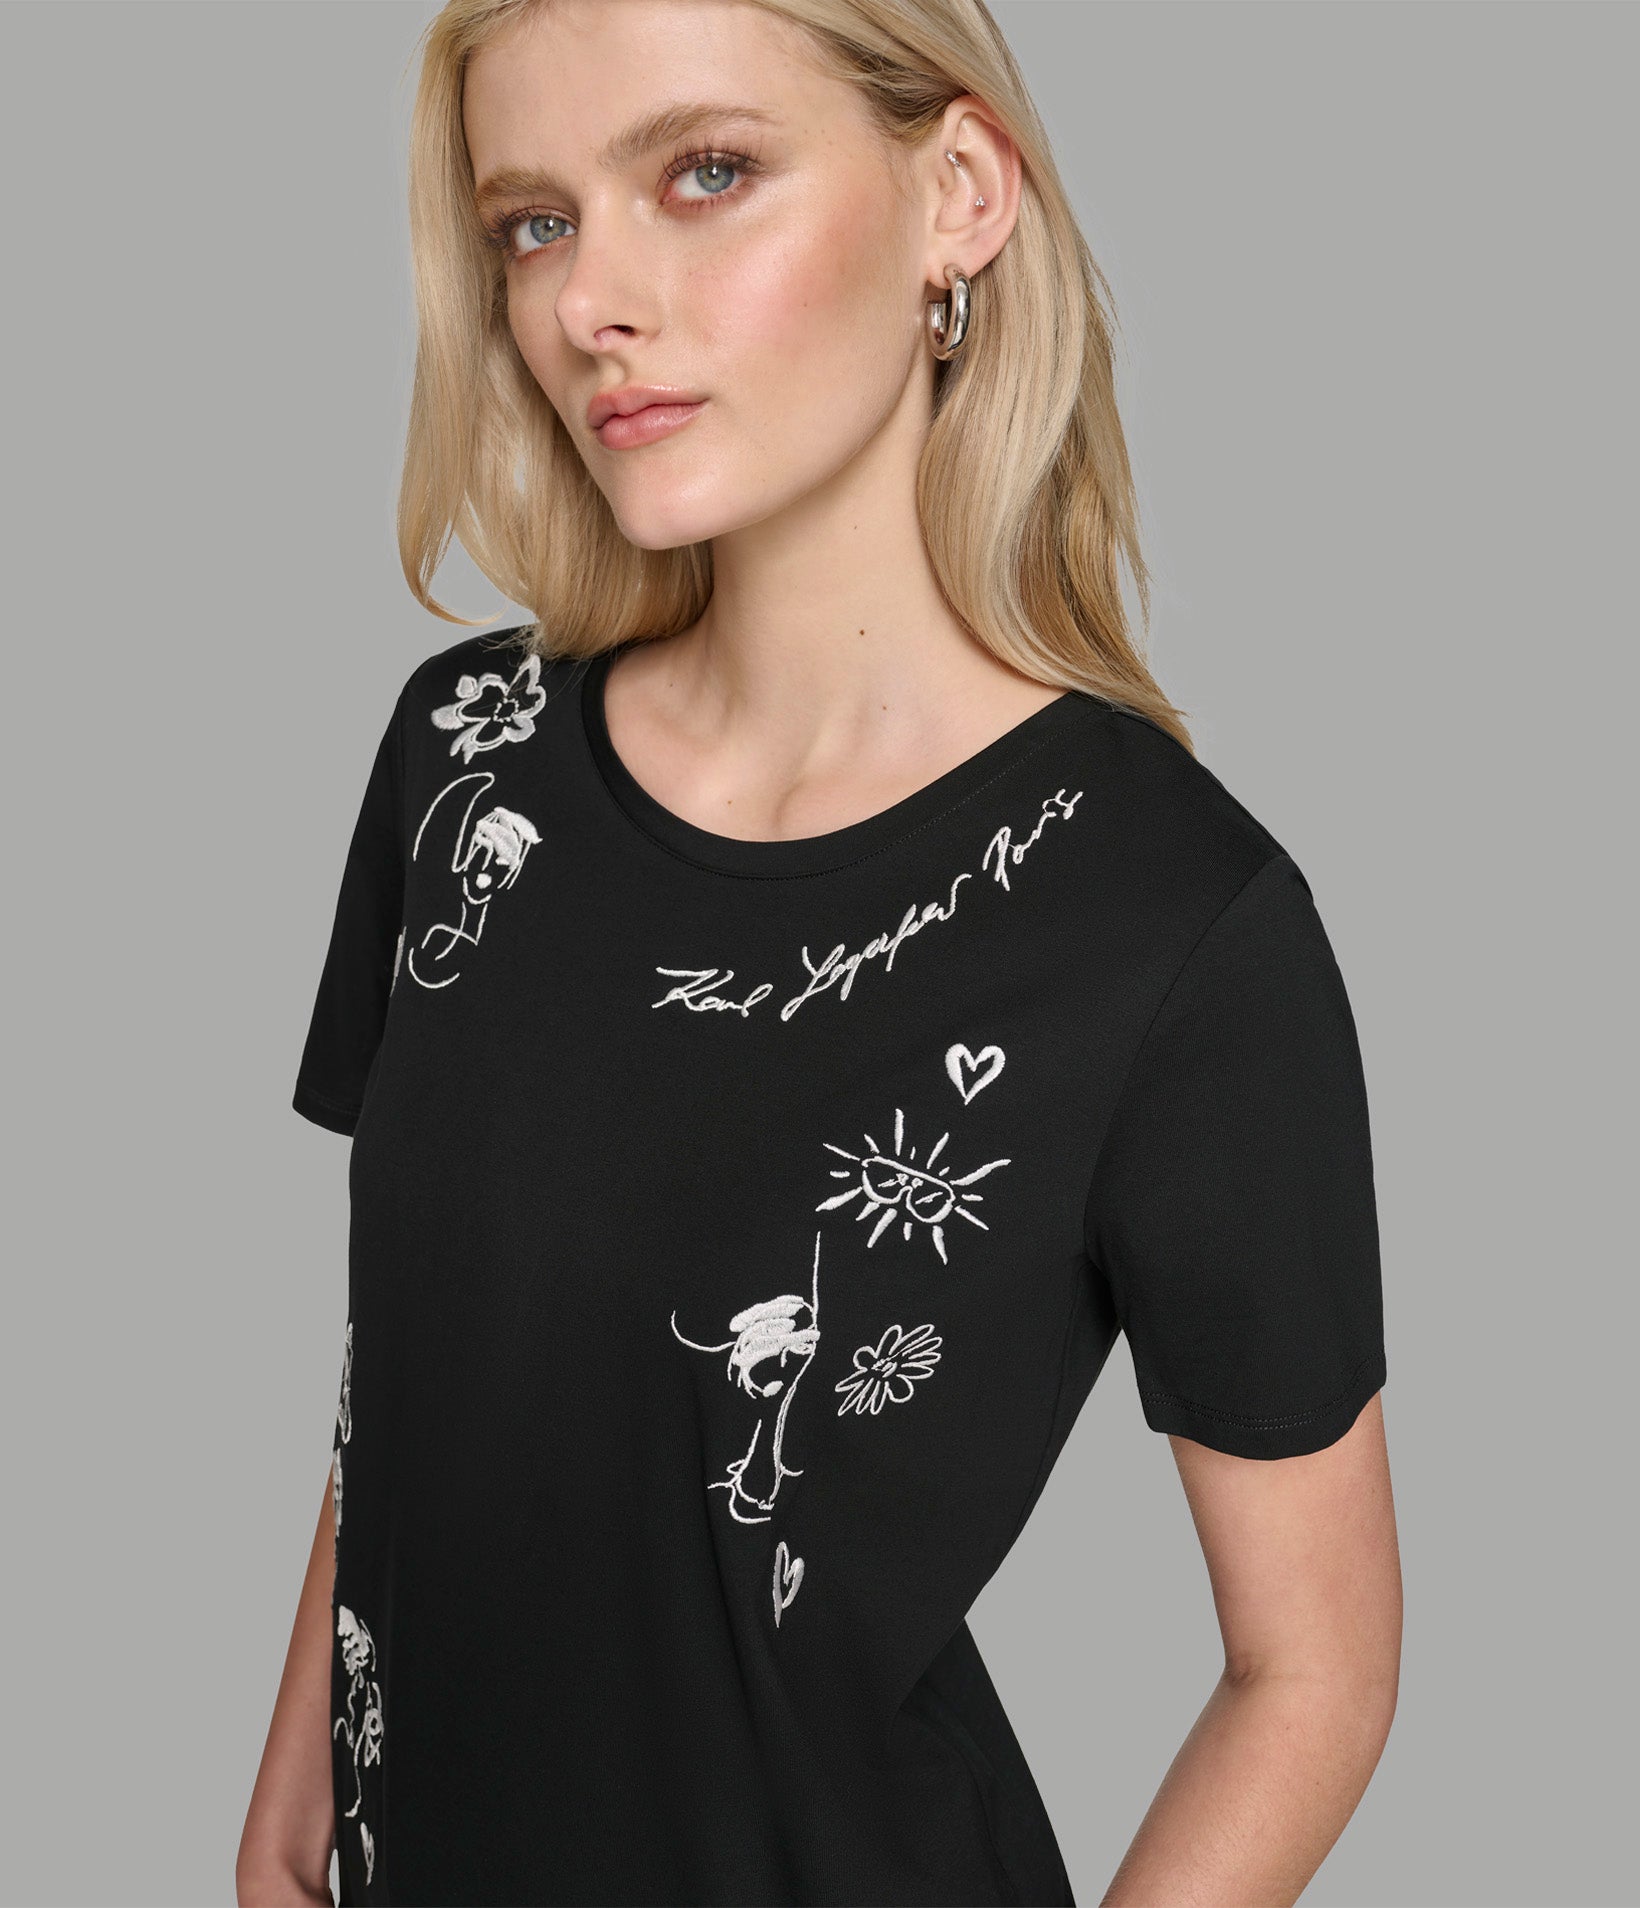 LUXE WHIMSY SKETCH TEE